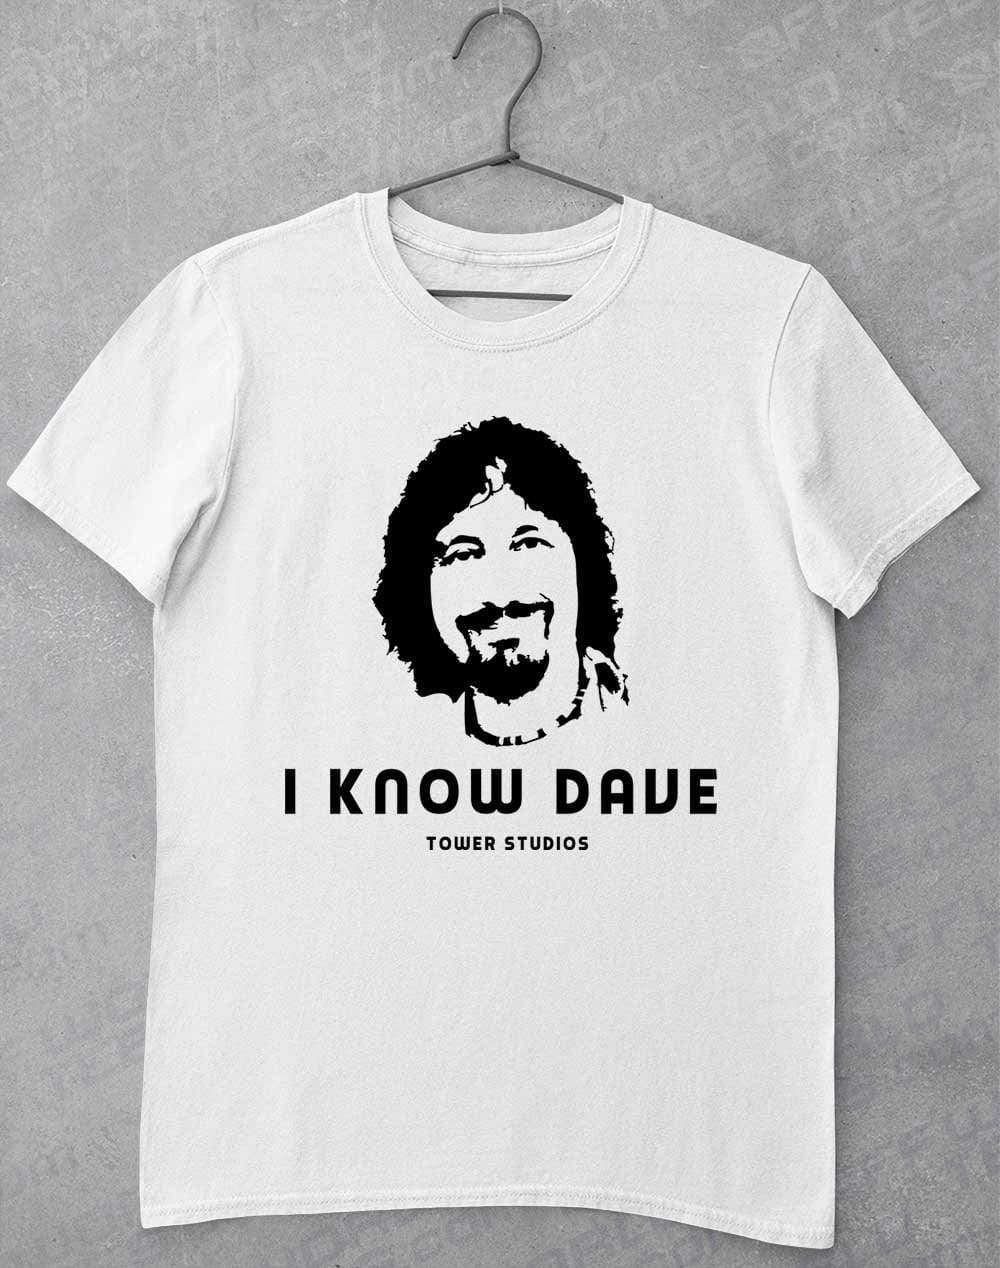 Tower Studios I Know Dave T-Shirt S / White  - Off World Tees